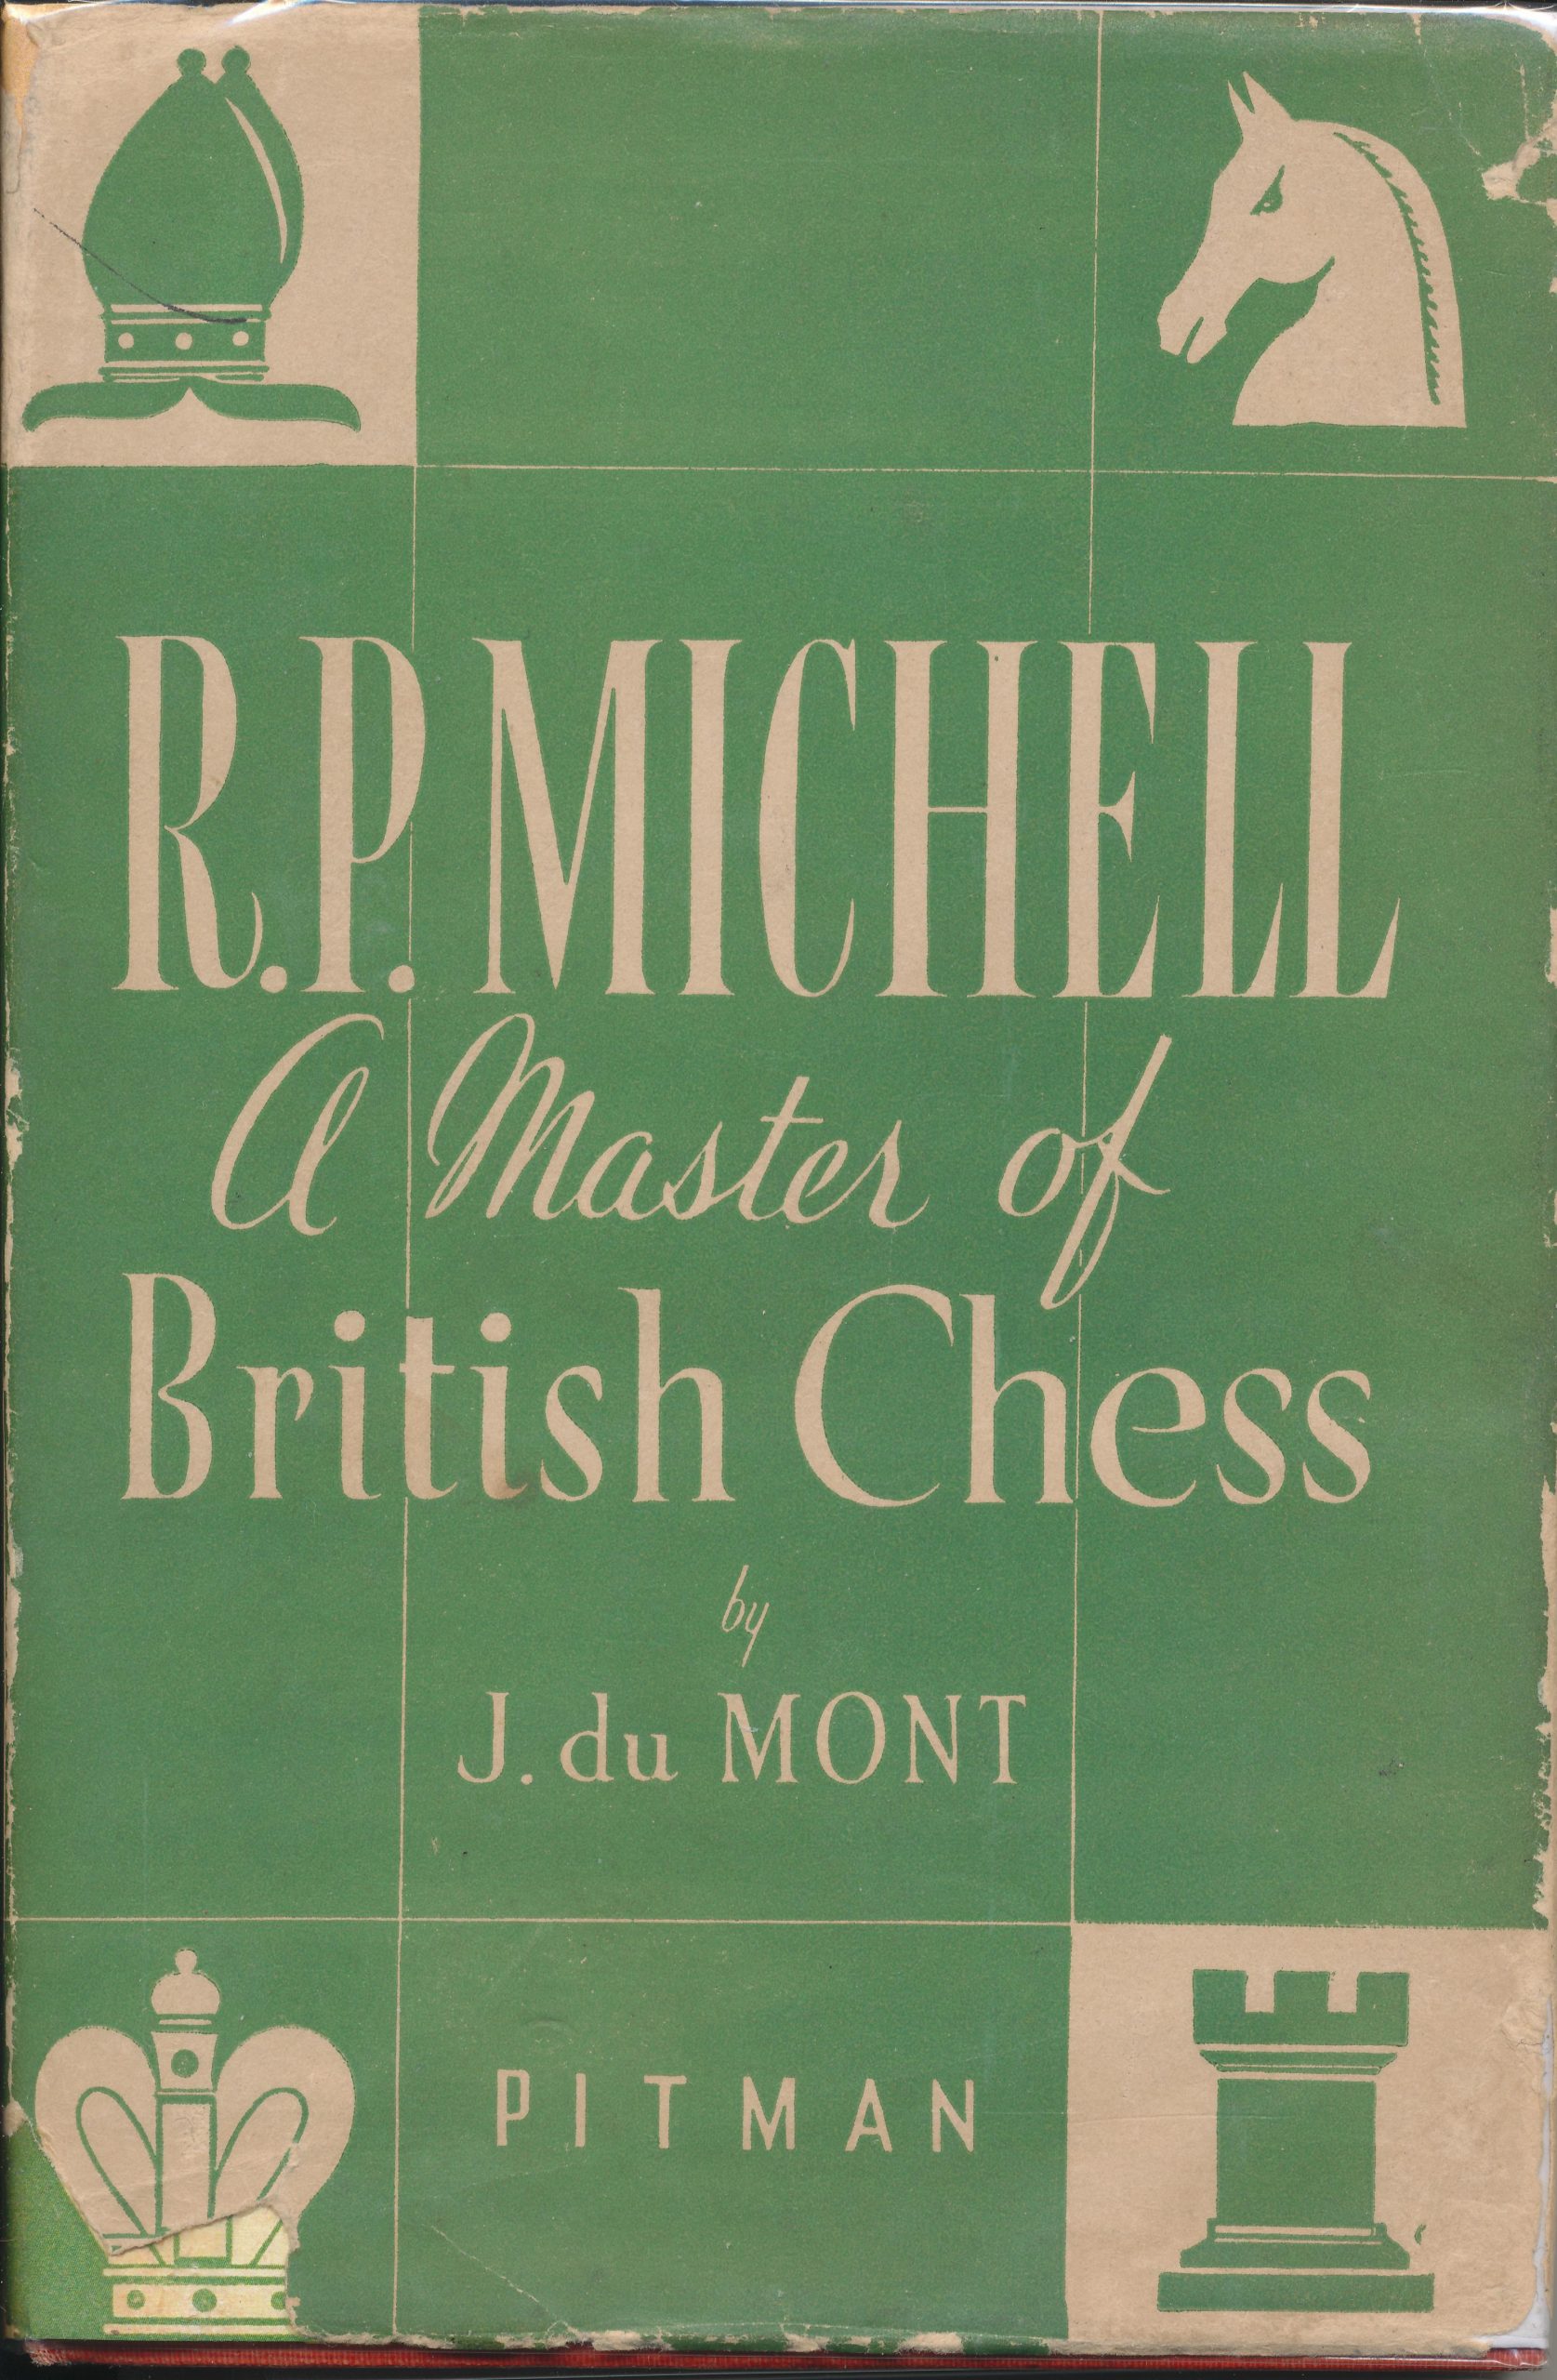 R.P. Michell: A Master of British Chess by J. du Mont, Pitman, 1947